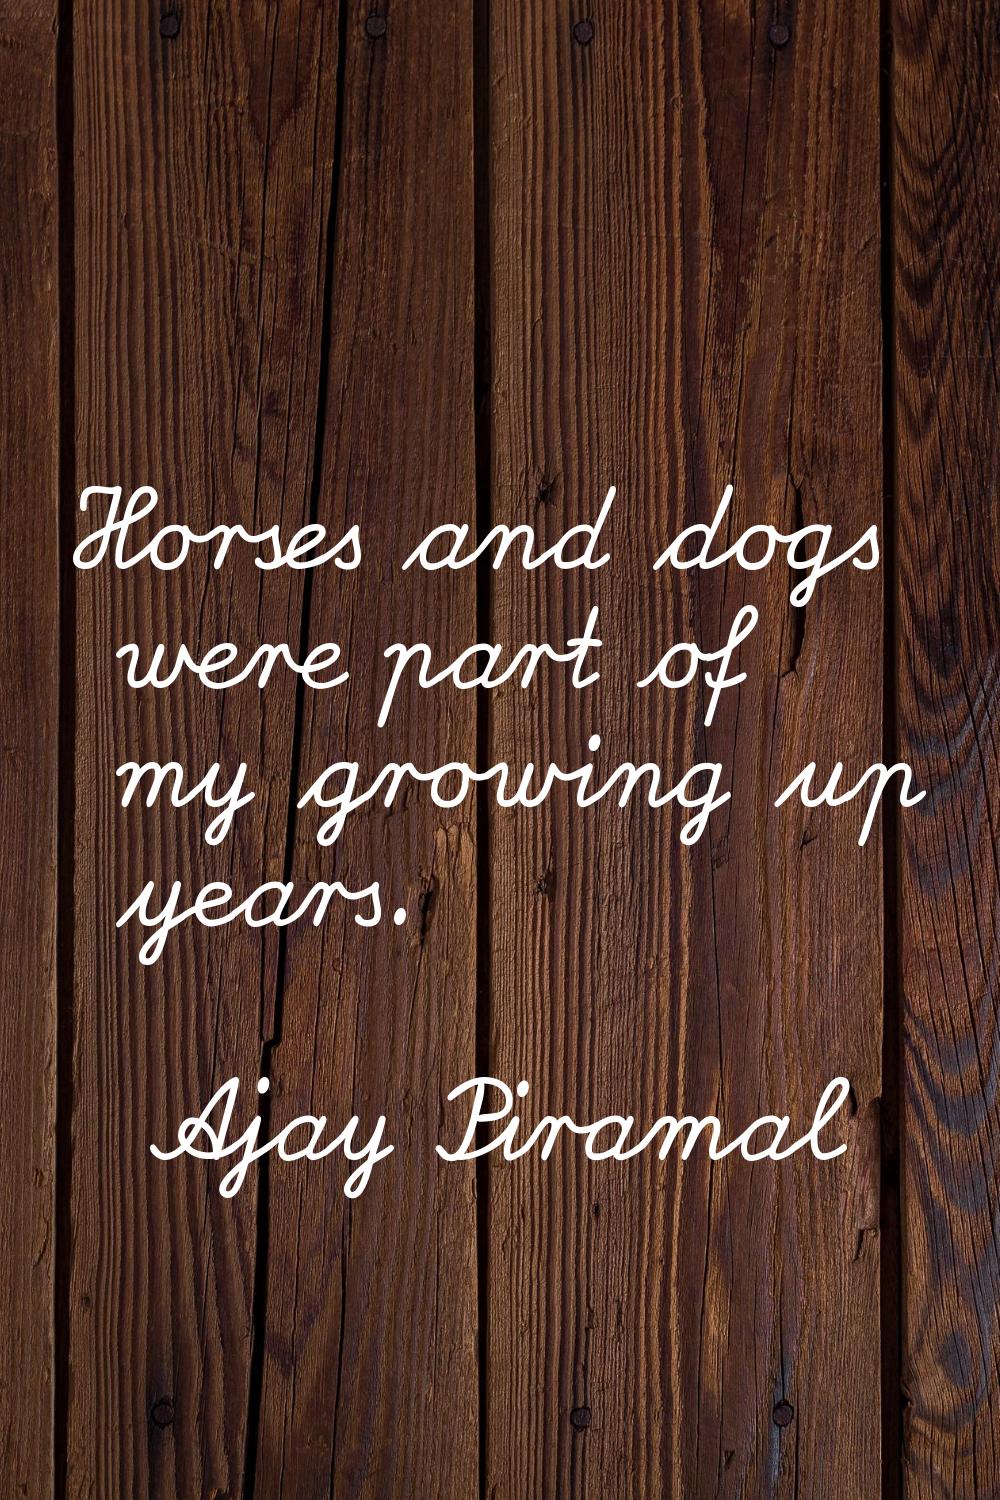 Horses and dogs were part of my growing up years.